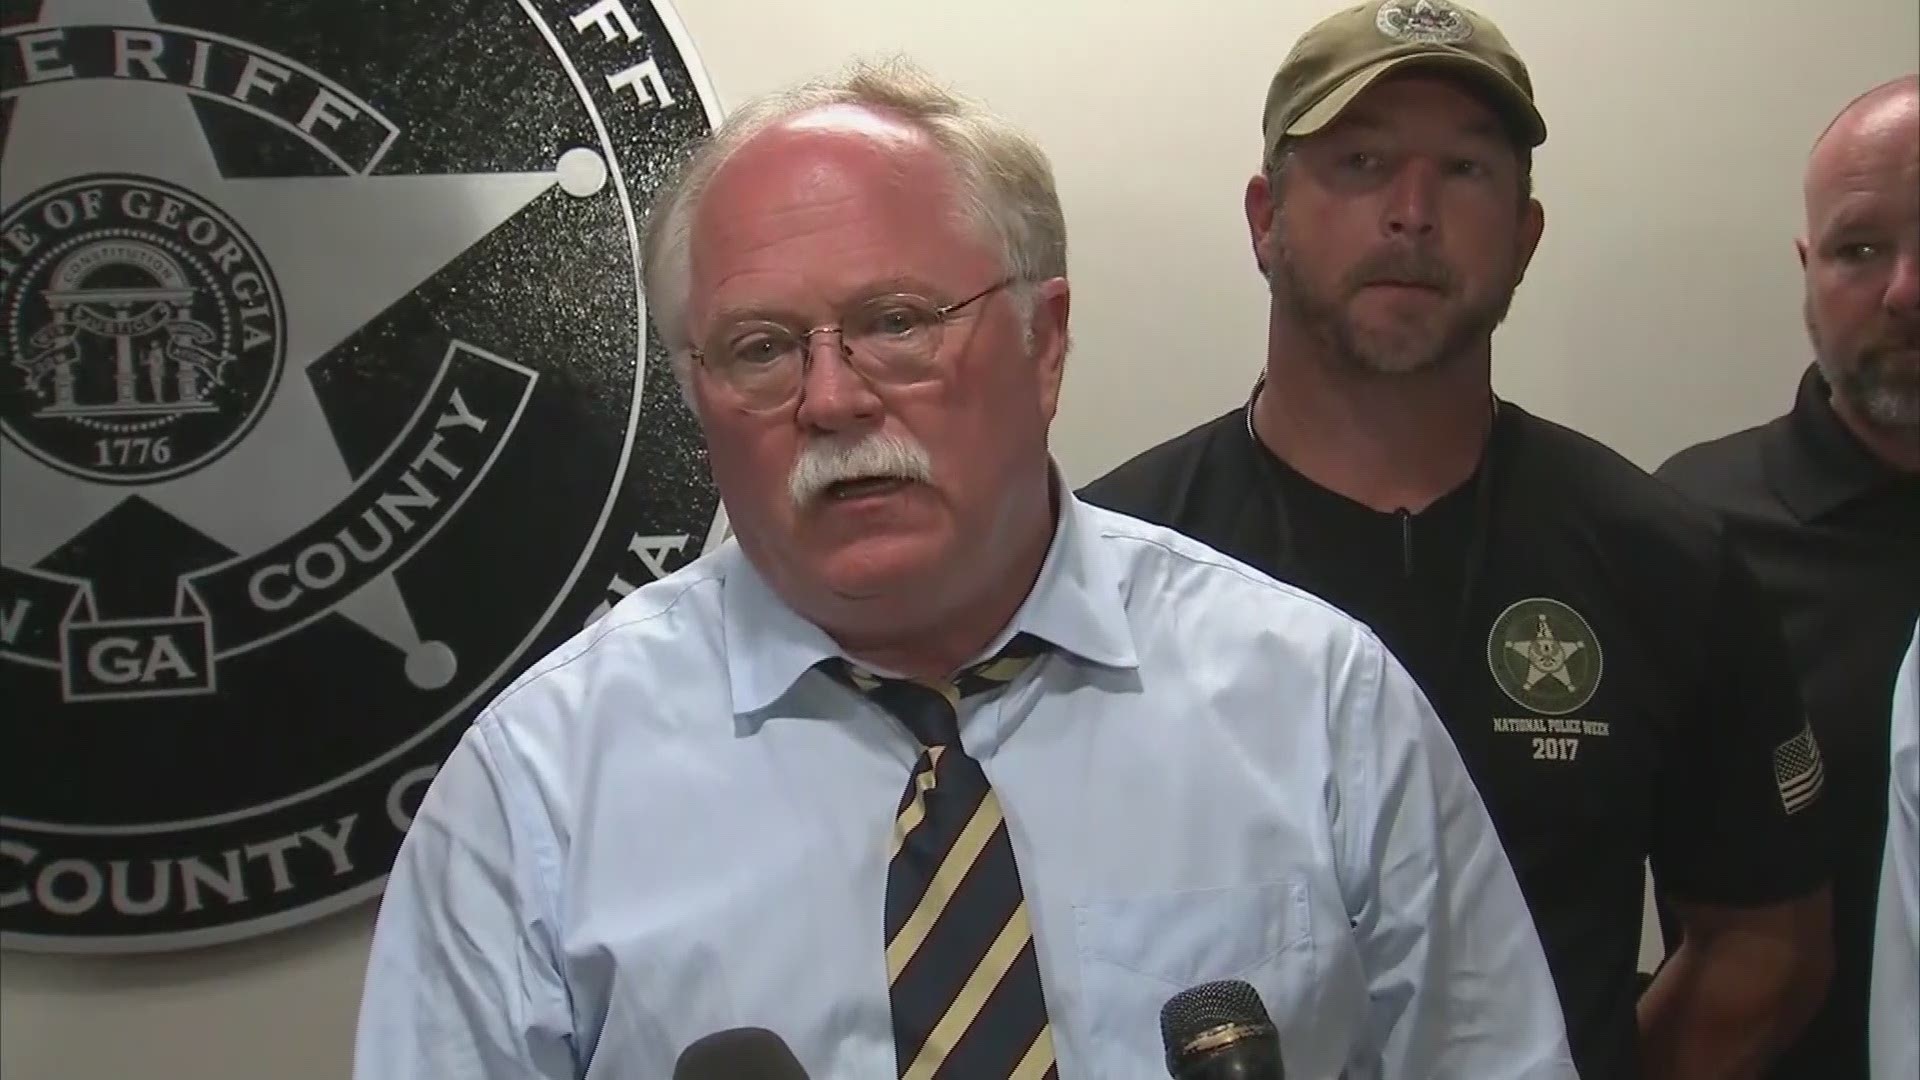 After a three-day massive manhunt for two escaped prison escapees accused of killing two corrections officers, Putnam County Sheriff Howard Sills addressed the media about the capture of Ricky Dubose and Donnie Rowe